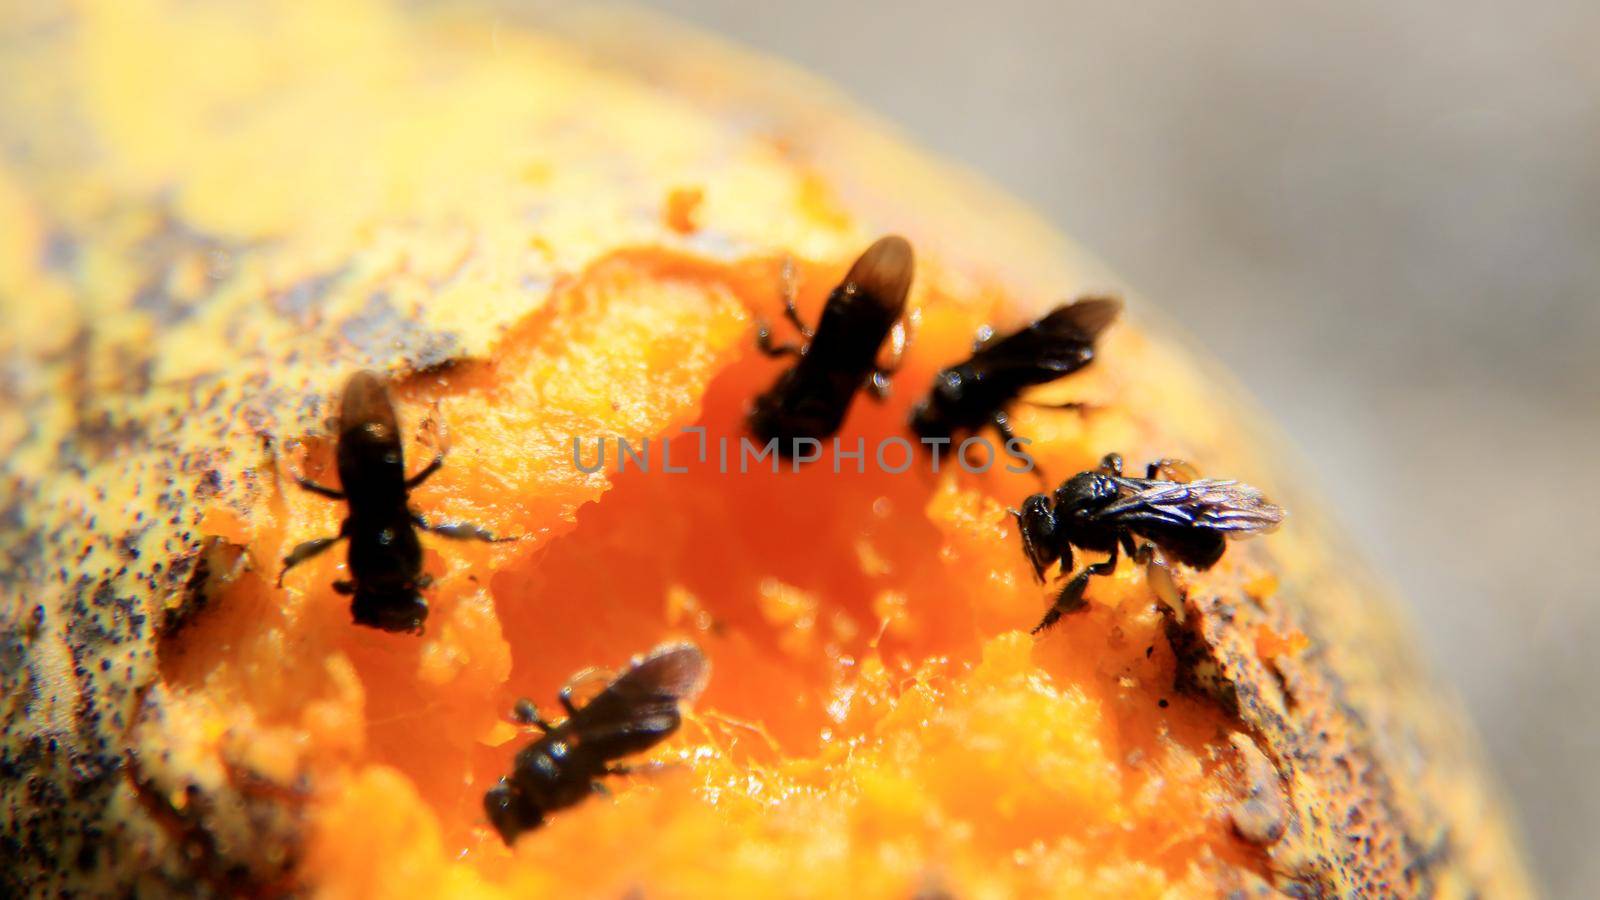 salvador, bahia / brazil - june 27, 2016: insects are seen eating mango in the city of Salvador.